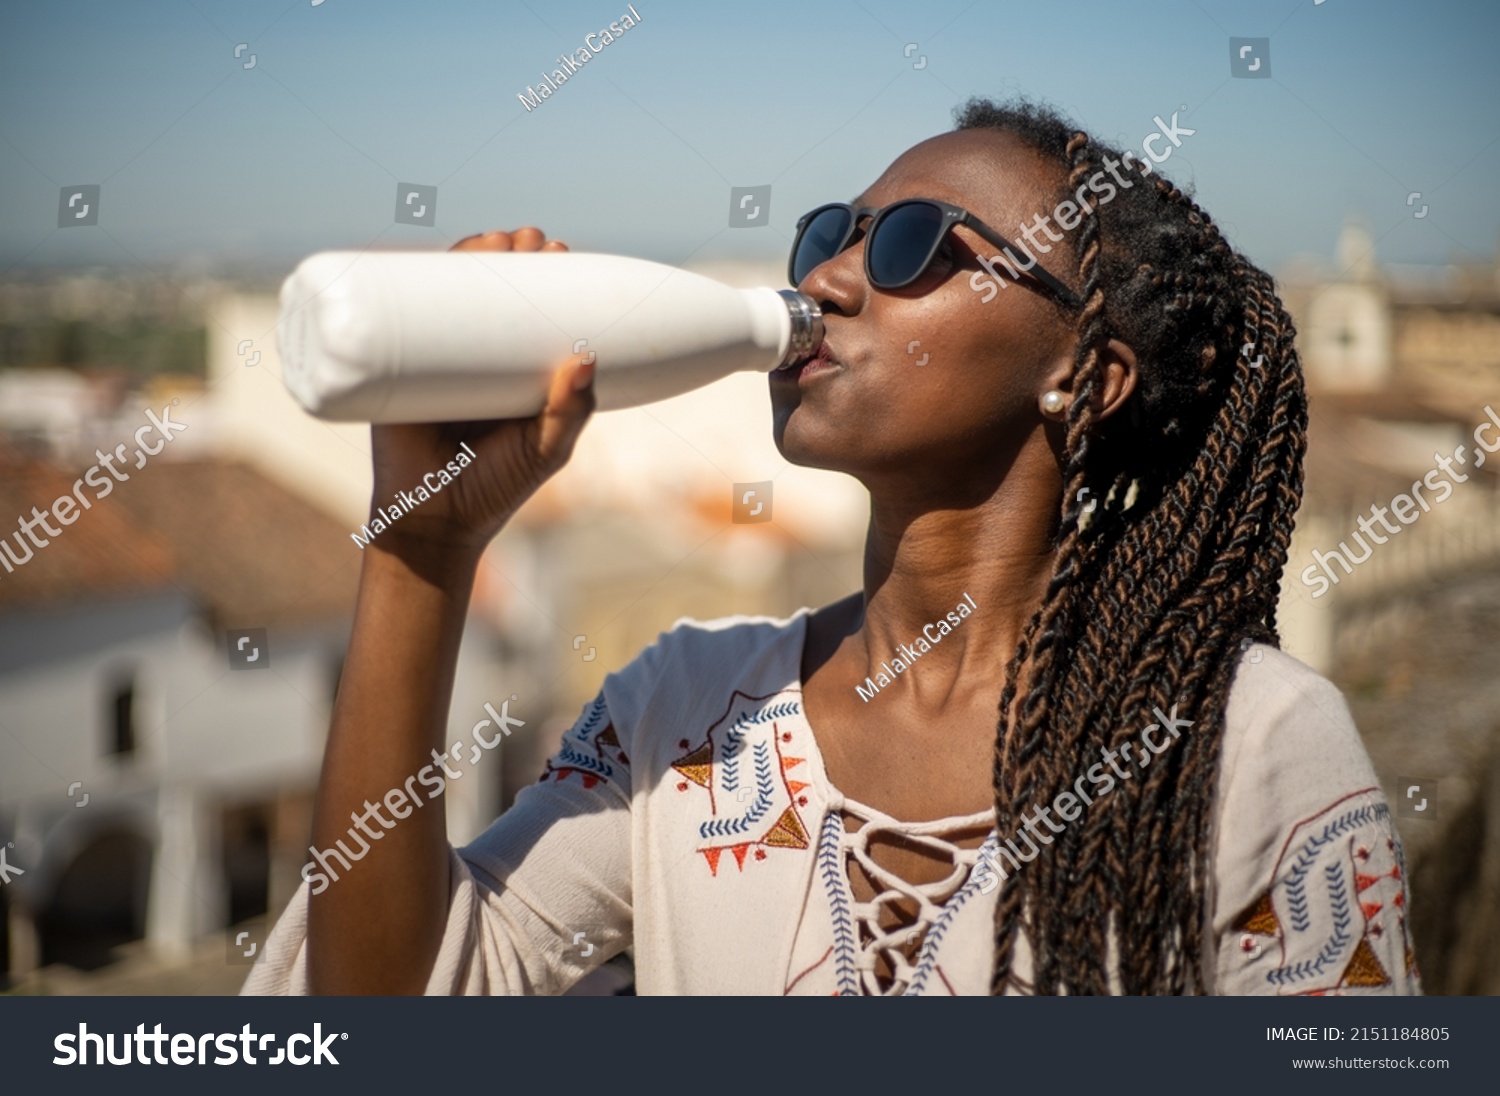 Young woman with sunglasses drinking water from a reusable bottle in a sunny day #2151184805